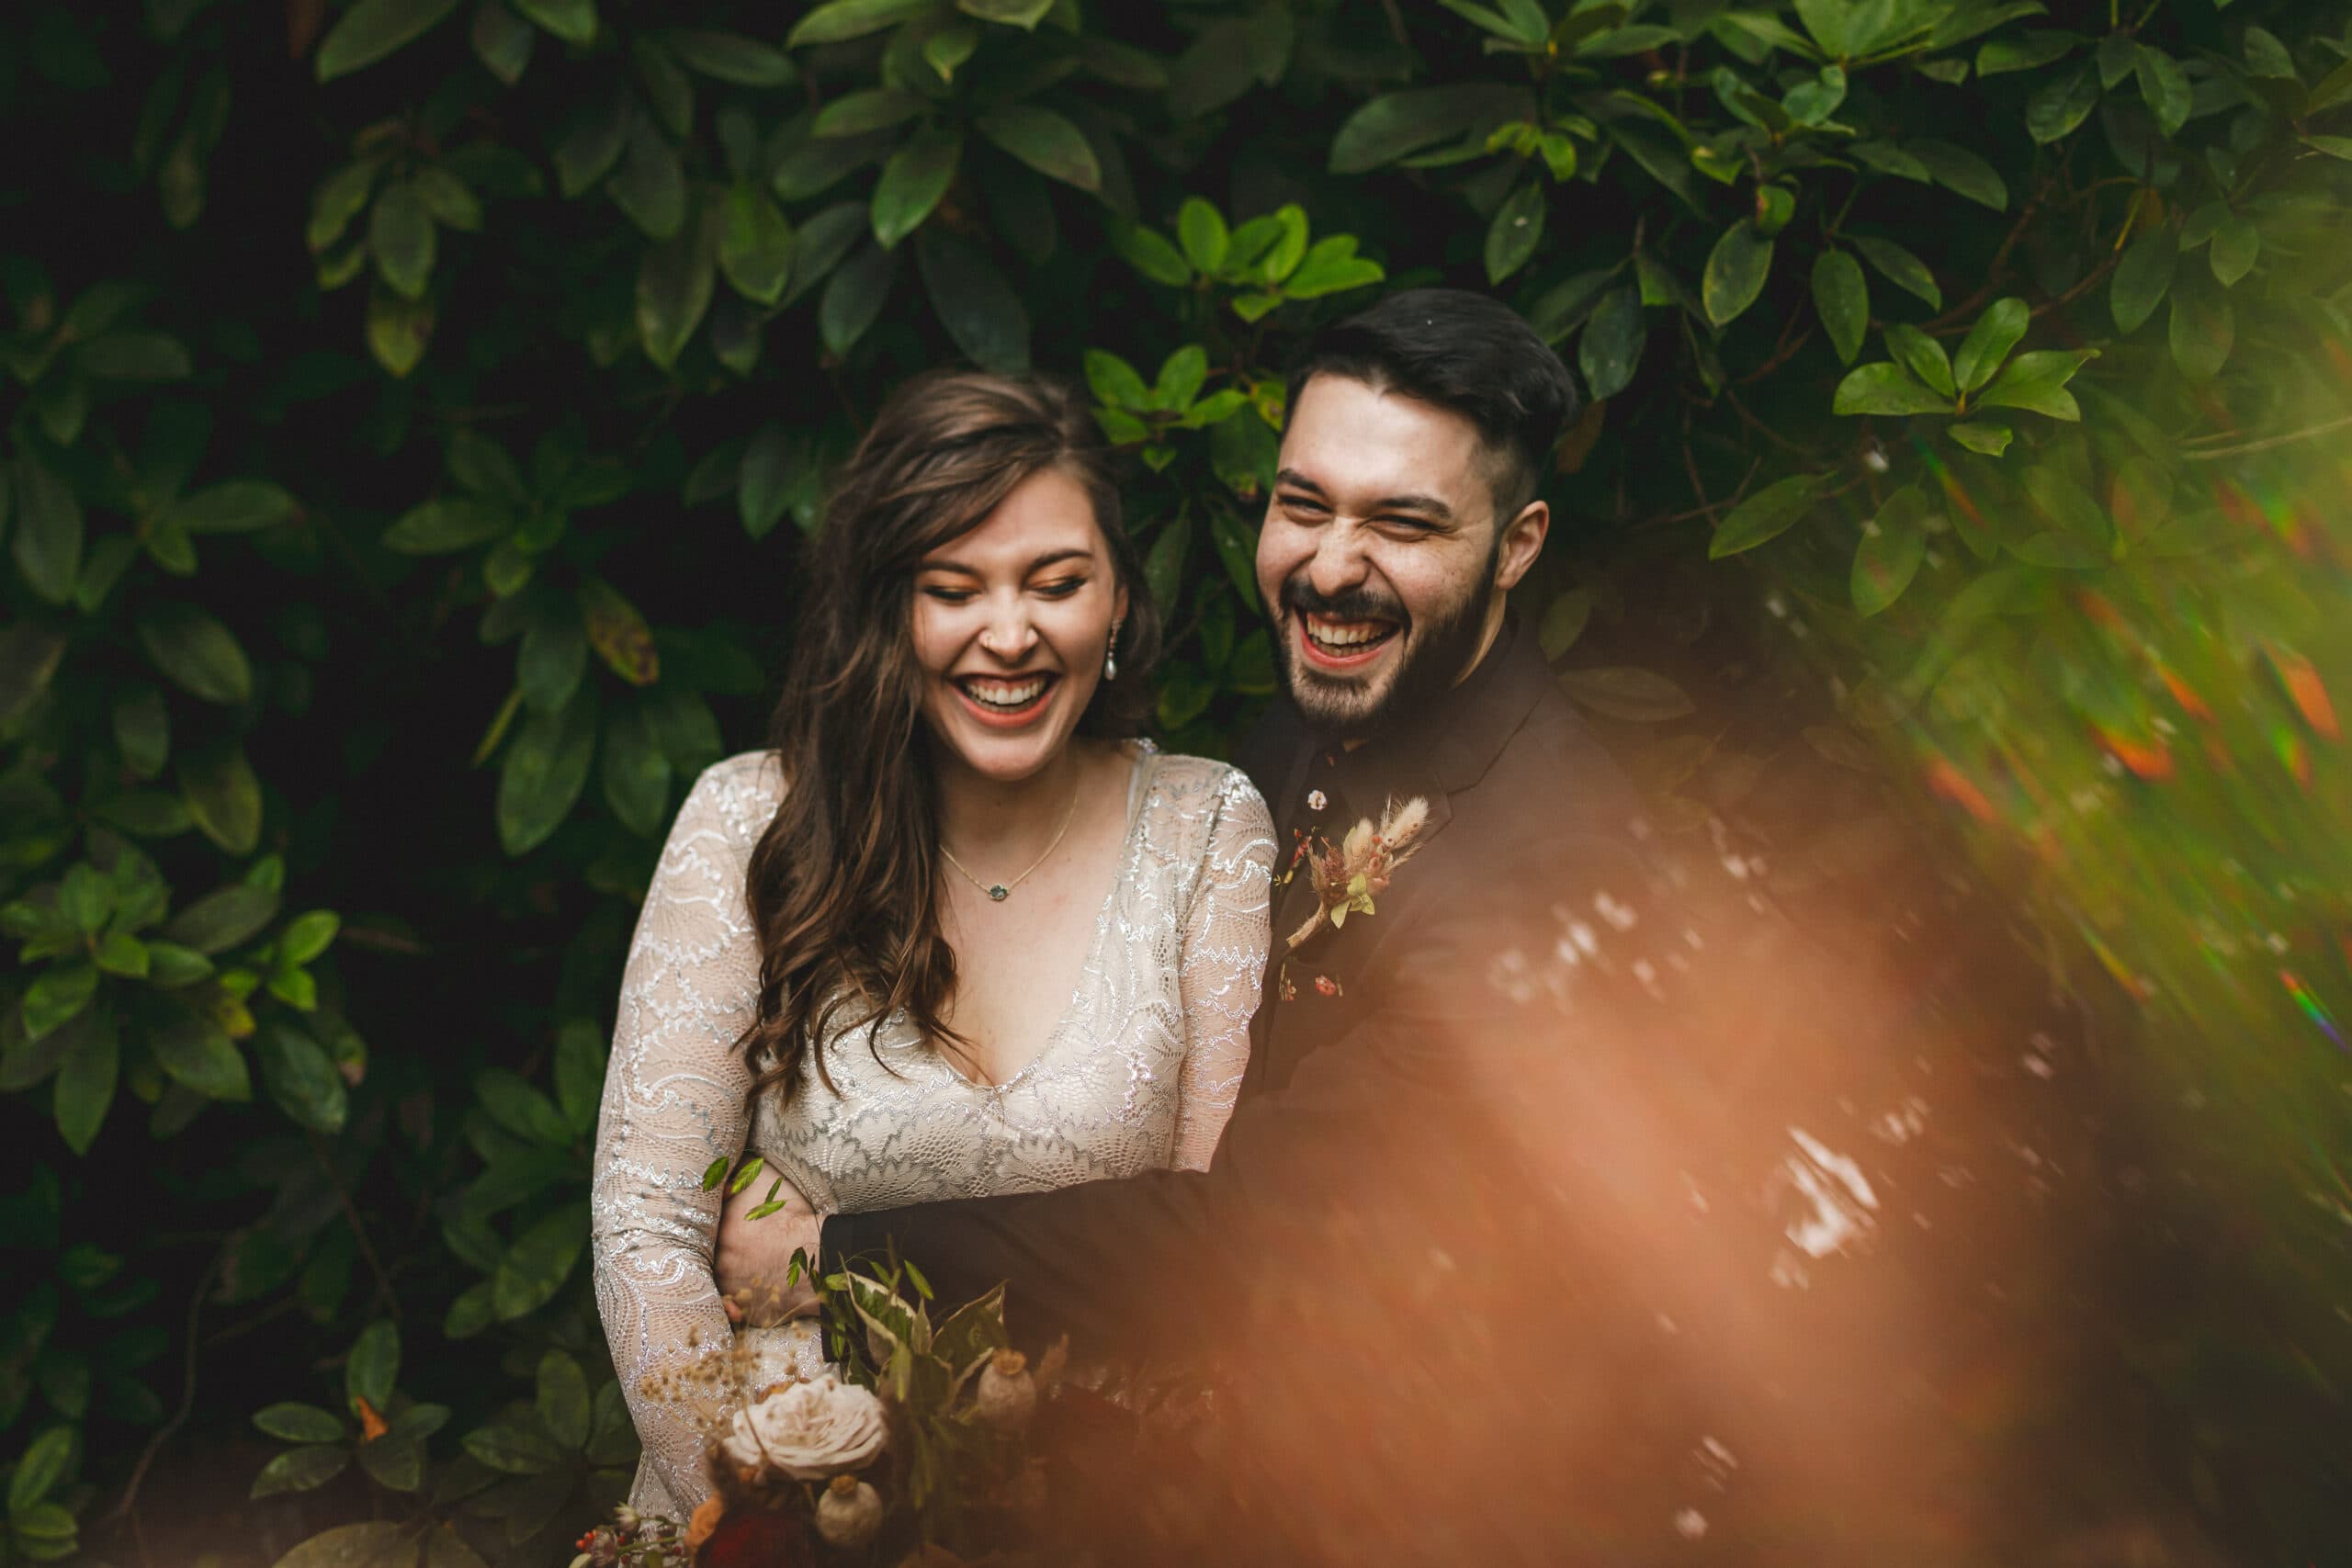 A happy bride and groom laughing in the woods surrounded by nature, creating a cozy and joyful atmosphere away from home.